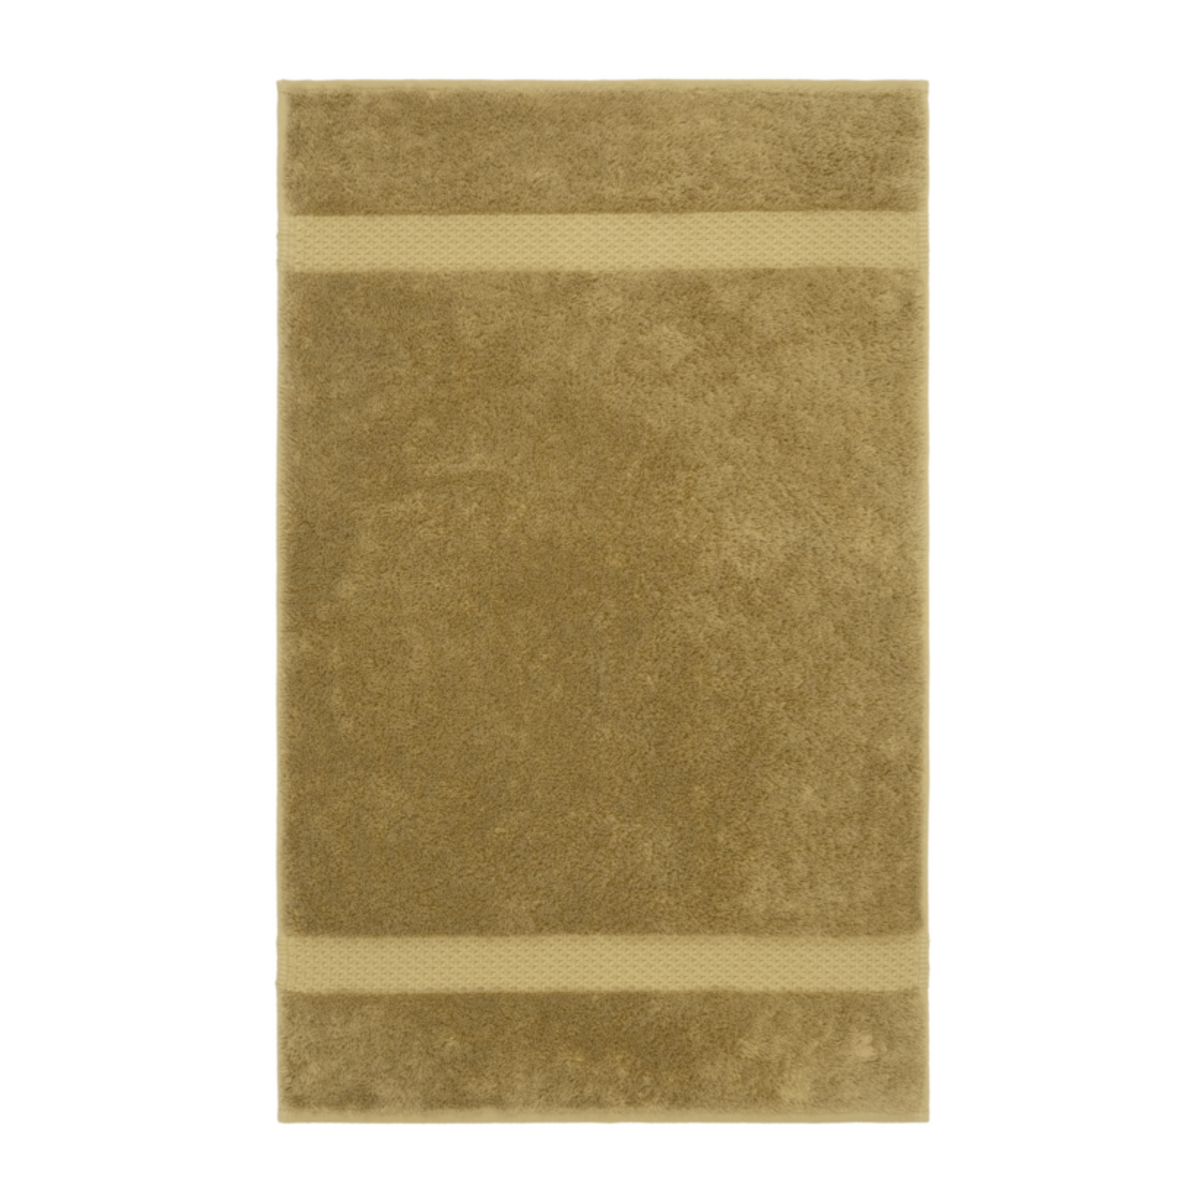 Bath Towel of Yves Delorme Etoile Bath Collection in Bronze Color